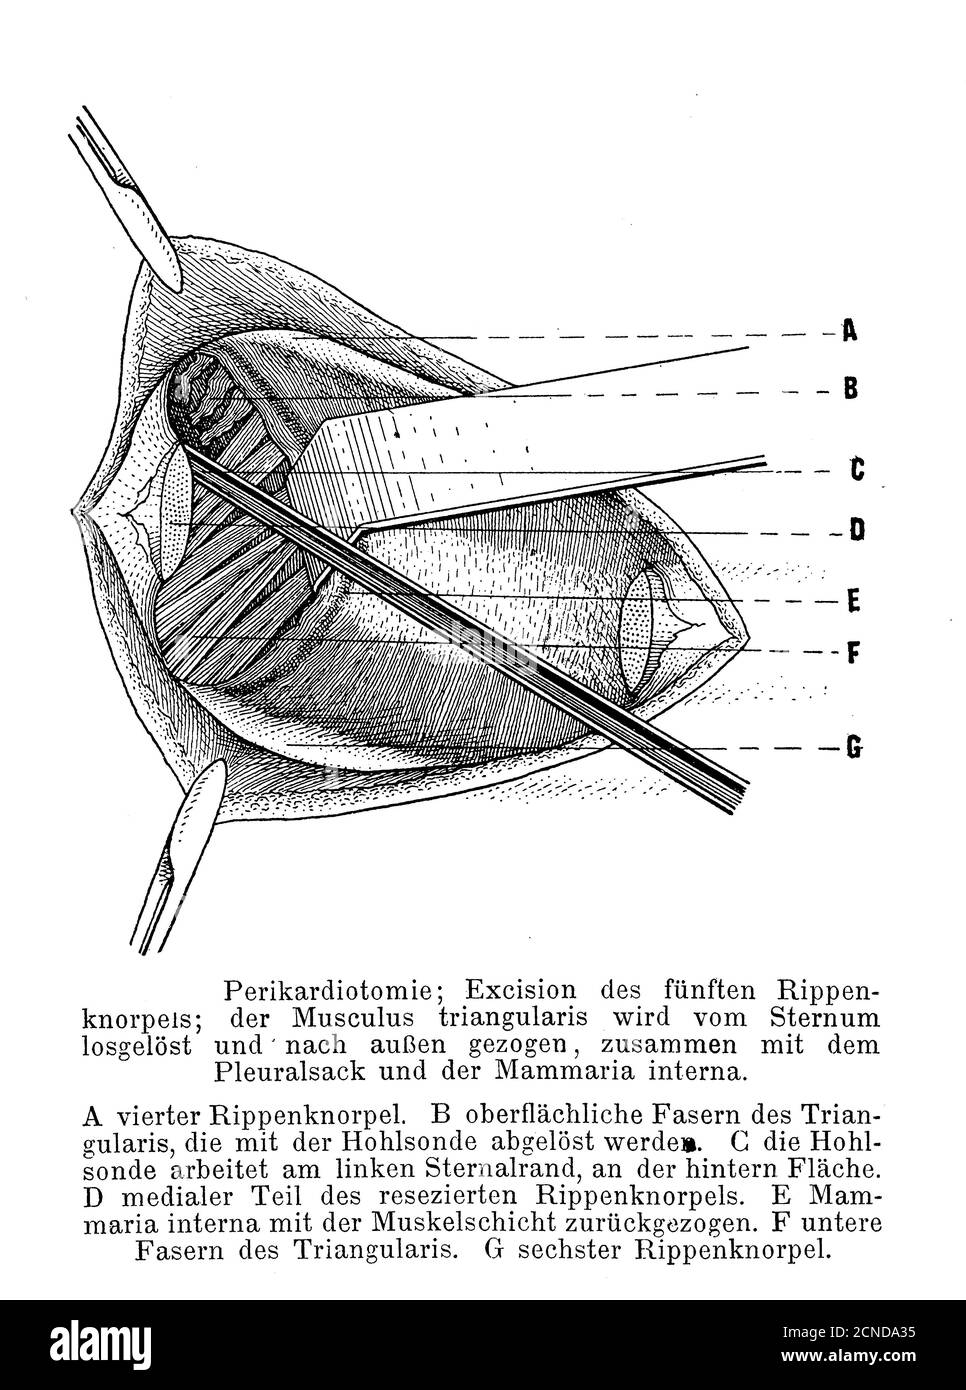 Healthcare, medicine and surgery: pericardiotomy, vintage illustration with operation description in German Stock Photo